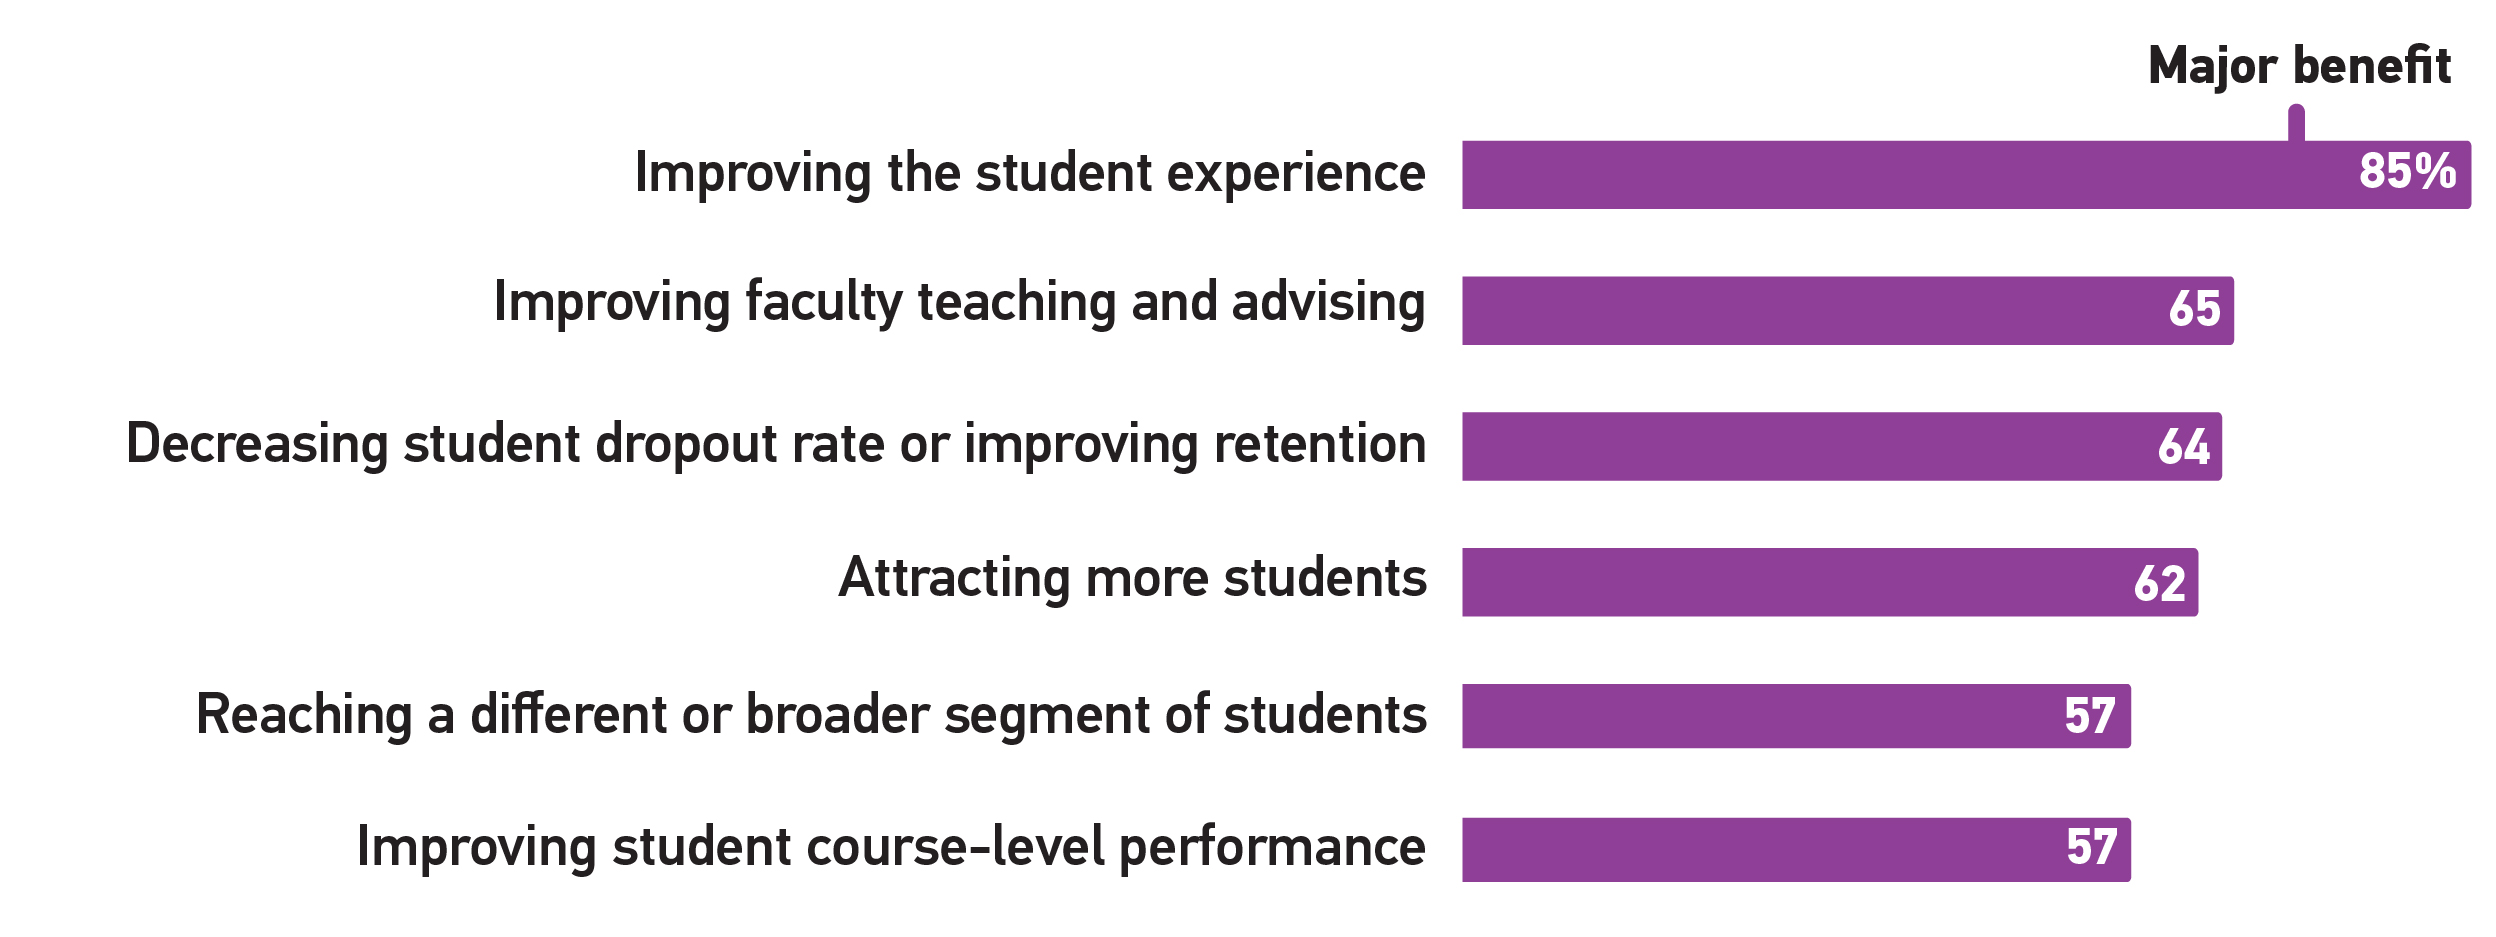 Factors most often called a major benefit of Dx:
			Improving the student experience (85% );
			Improving faculty teaching and advising (65%);
			Decreasing student dropout rate or improving retention (64%);
			Attracting more students (62%);
			Ensuring institutional survival (60%);
			Improving student course-level performance (57%)